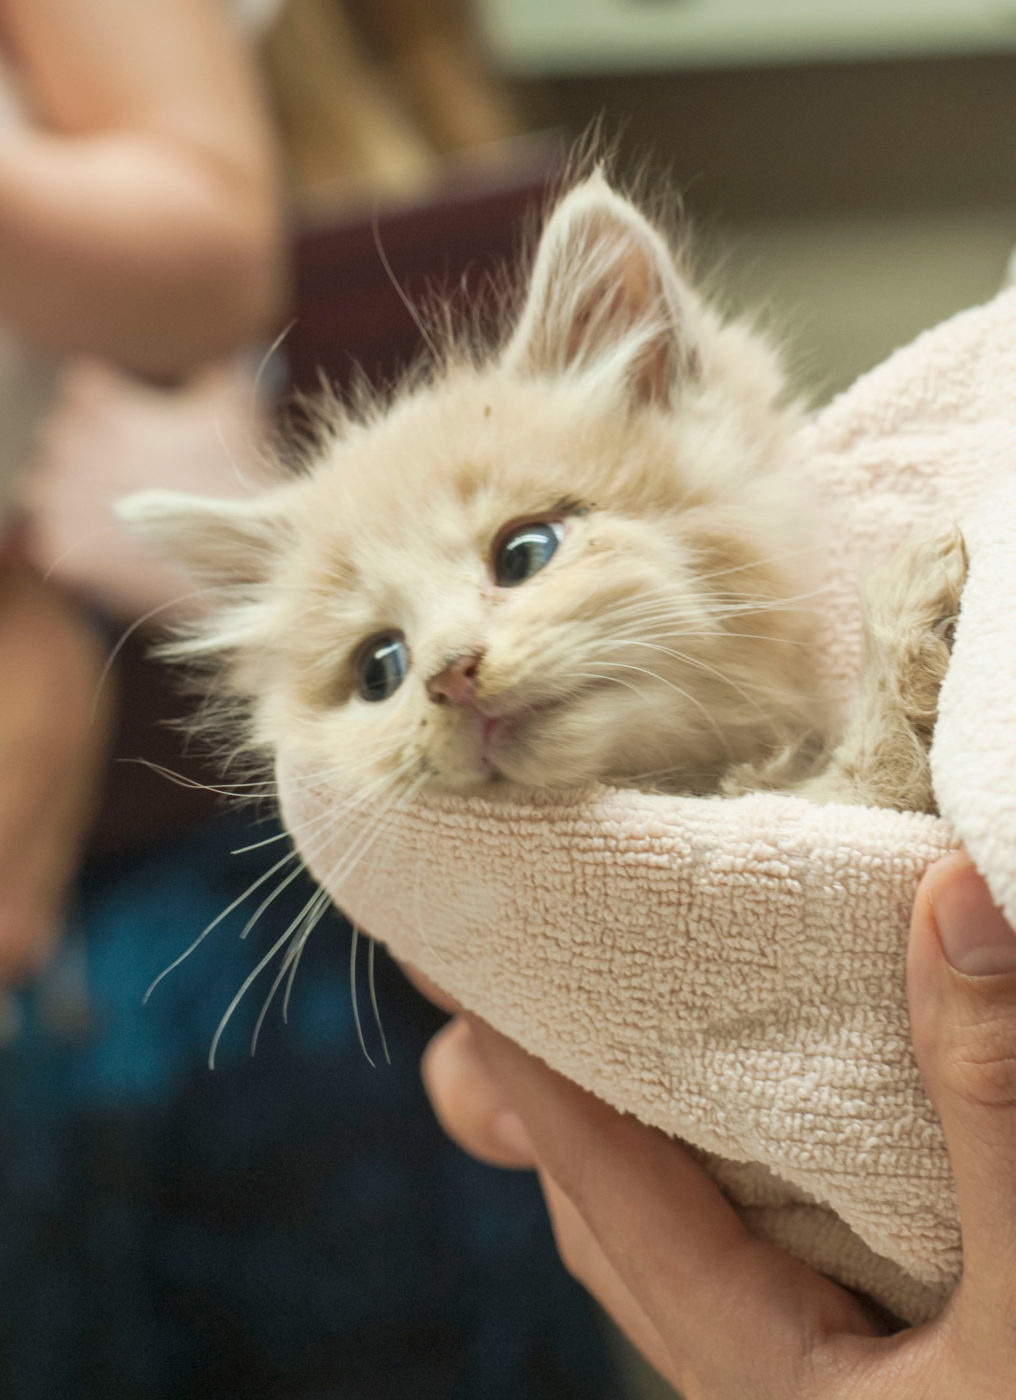 Hands hold a kitten wrapped in a towel.